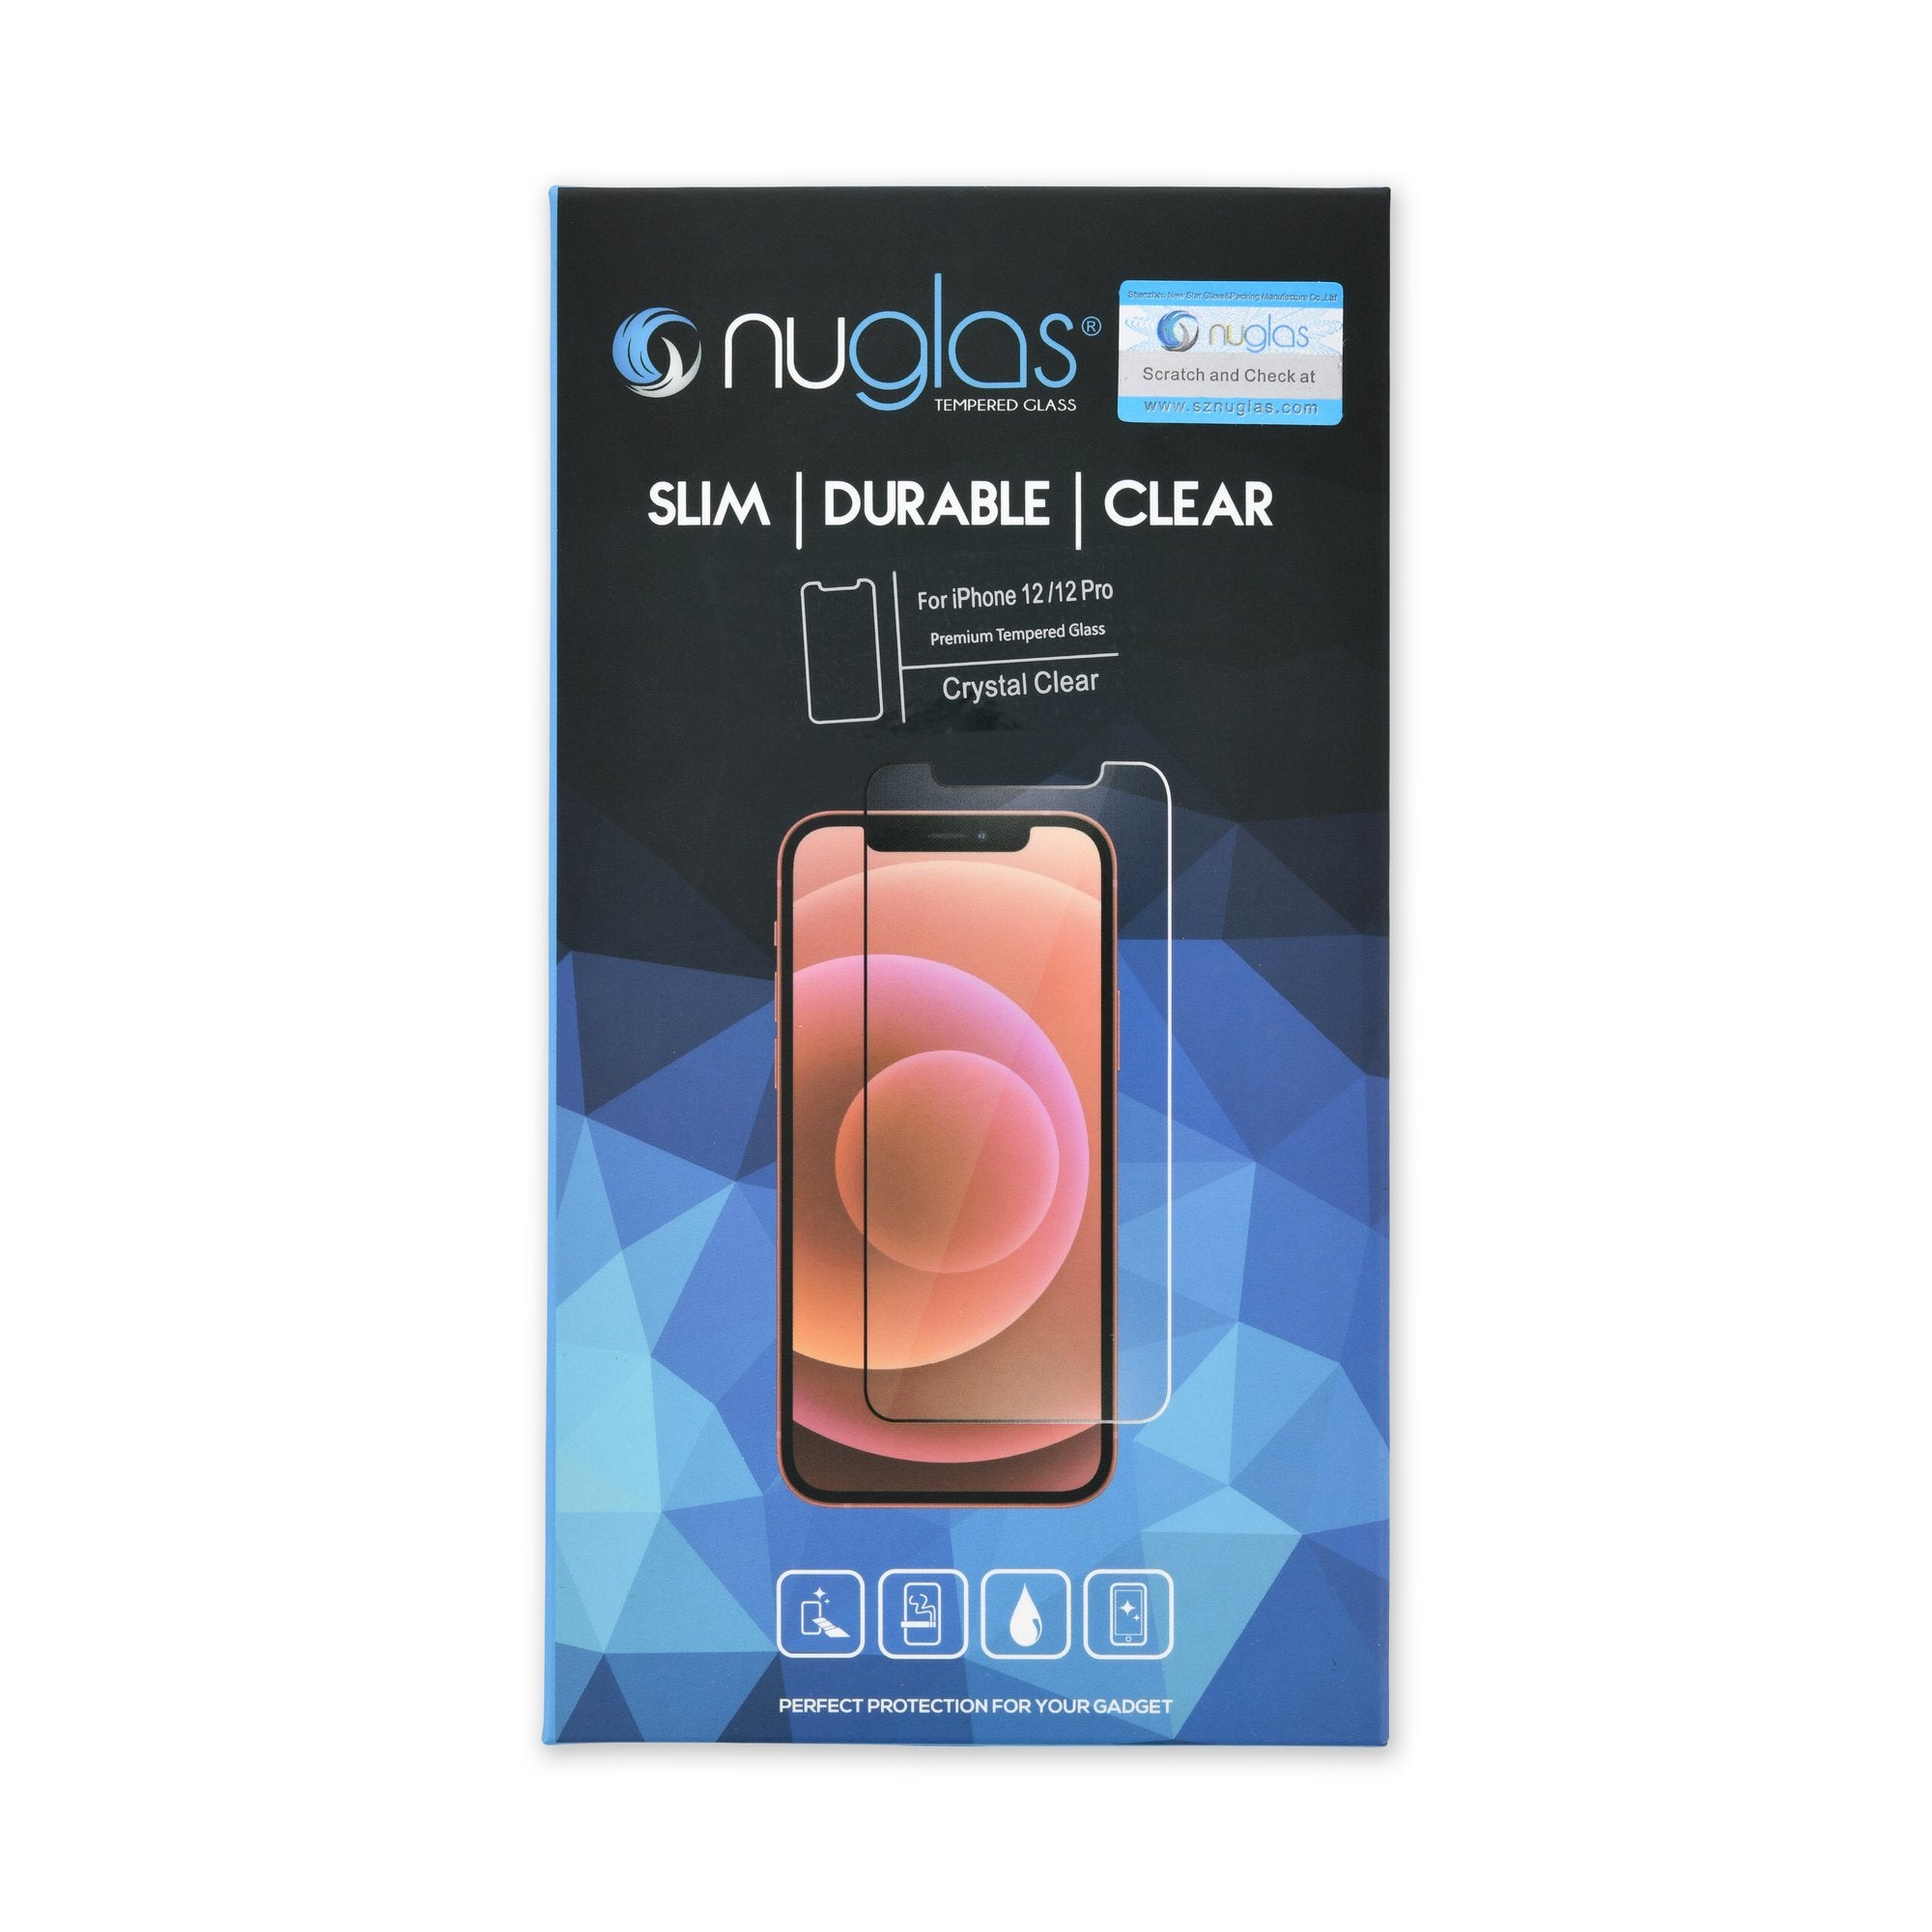 NuGlas Tempered Glass Screen Protector for iPhone 12/12 Pro New